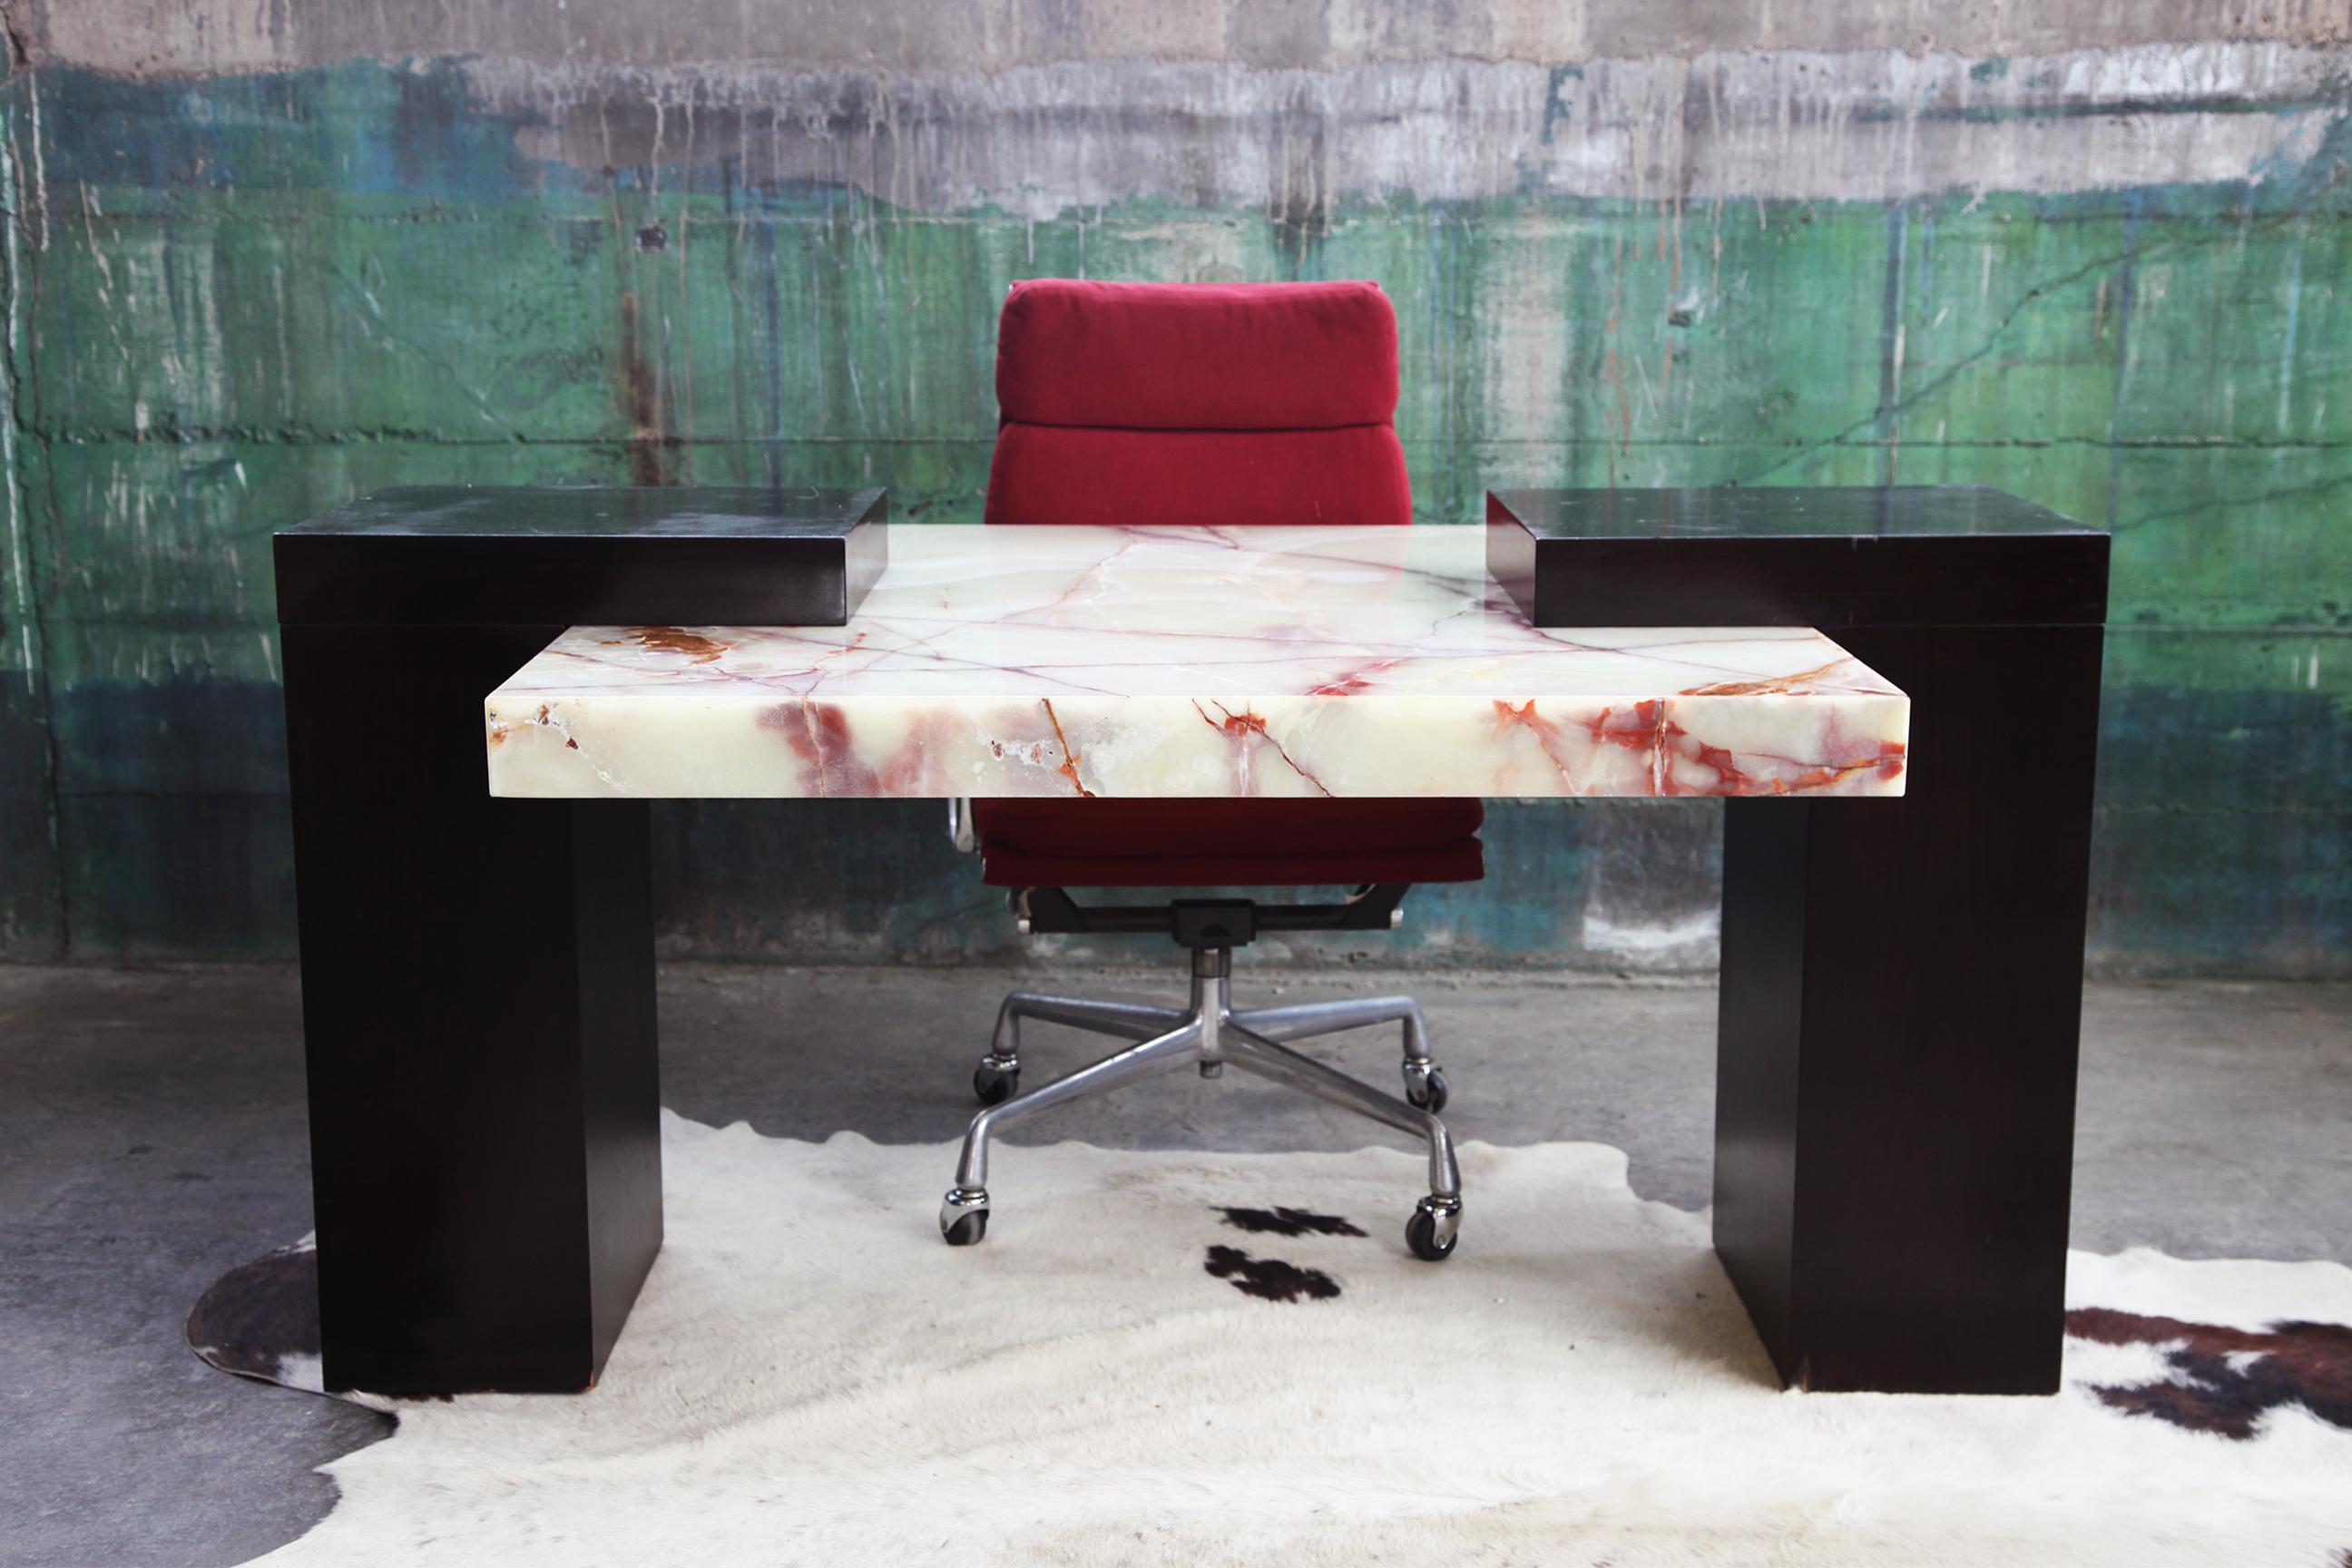 Incredible 1980s Postmodern Marble designer desk. Great for use as an executive desk or a two sided desk. The black pieces supporting the marble writing surface work well to hold desk lamps. The design is stunning. Original 1980s showroom price tag